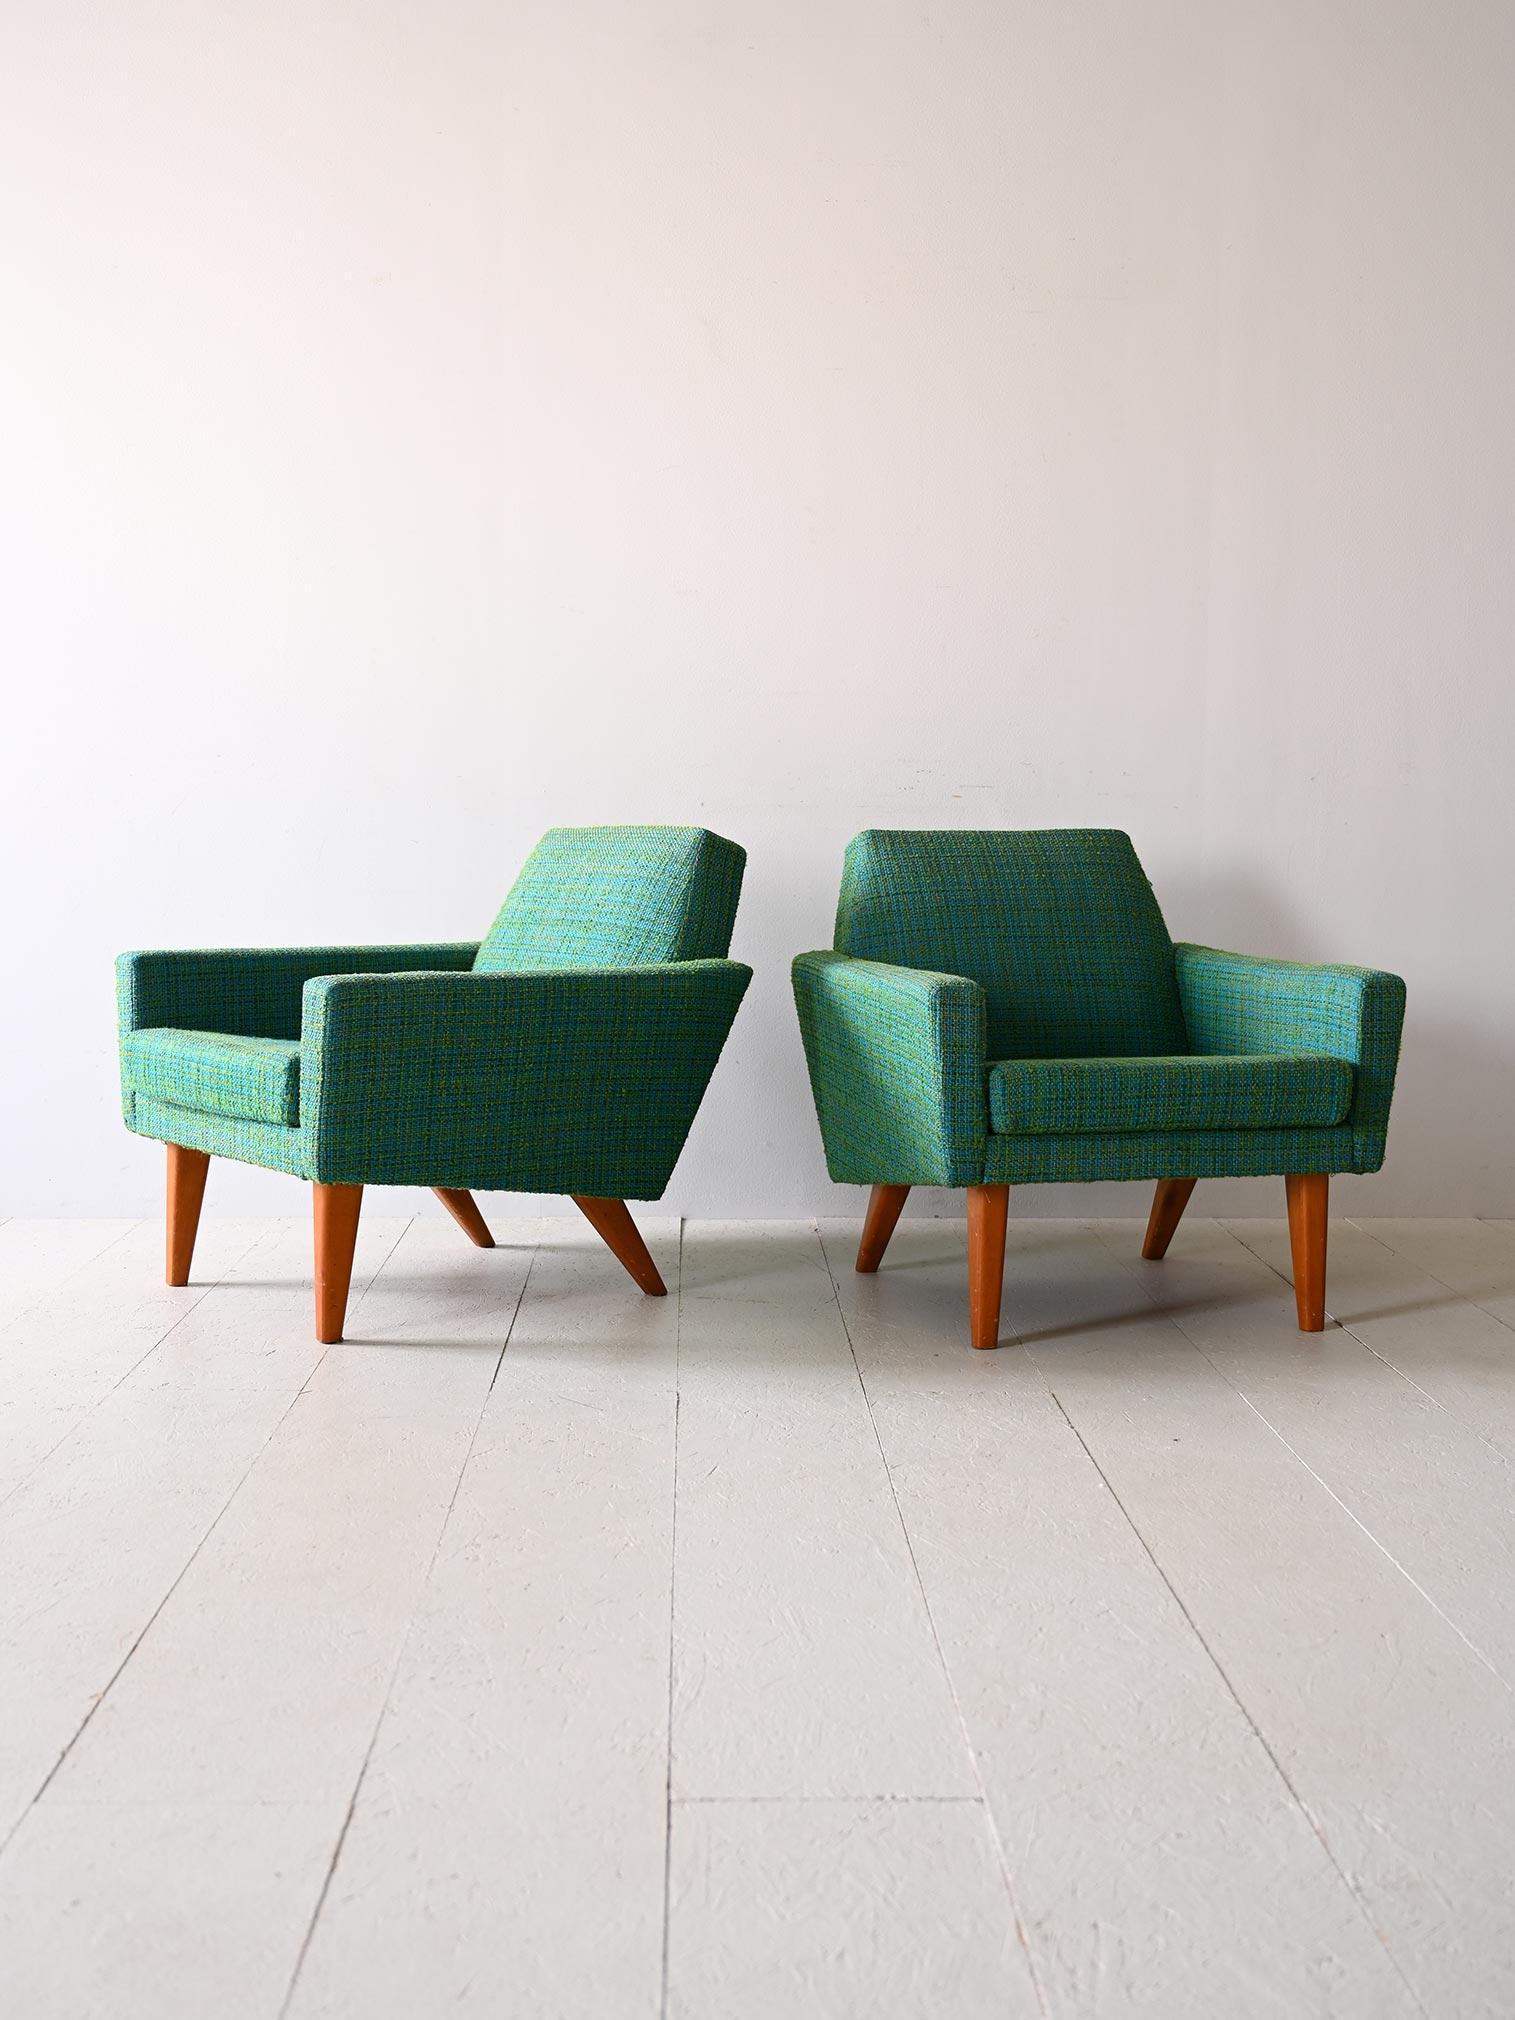 Pair of original vintage armchairs from the 1960s.

Original Scandinavian-made chairs that are characterized by their original square shape with marked corners.

The green fabric is original as is the padding, still in good condition.

The feet are